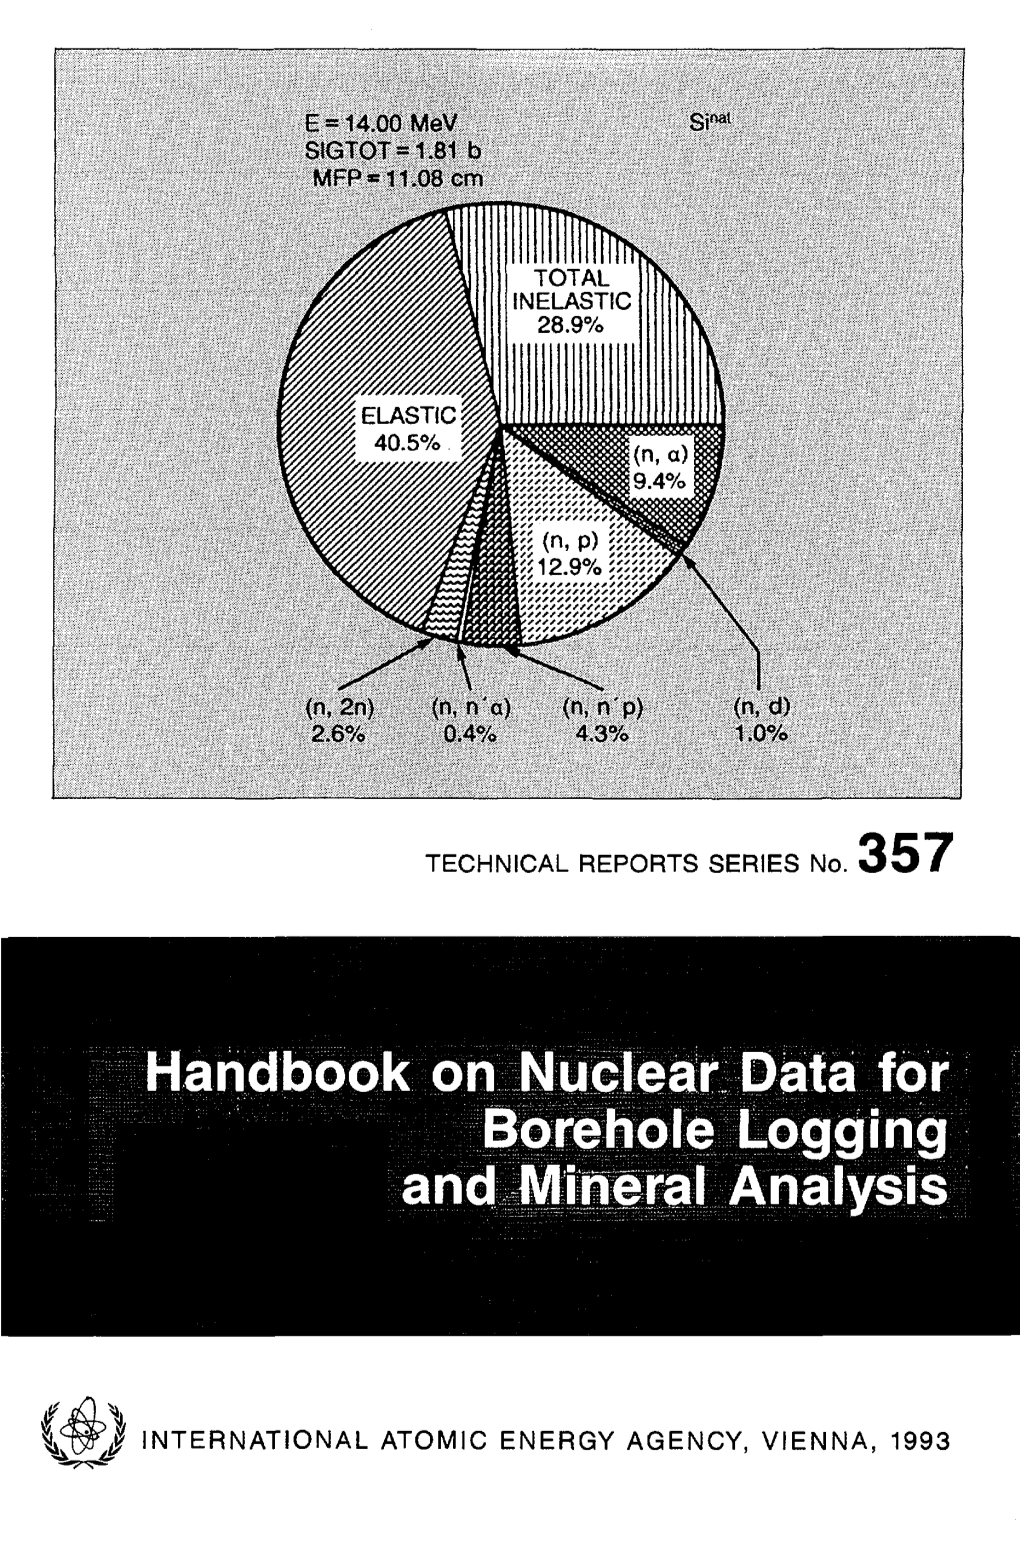 HANDBOOK on NUCLEAR DATA for BOREHOLE LOGGING and MINERAL ANALYSIS the Following States Are Members of the International Atomic Energy Agency